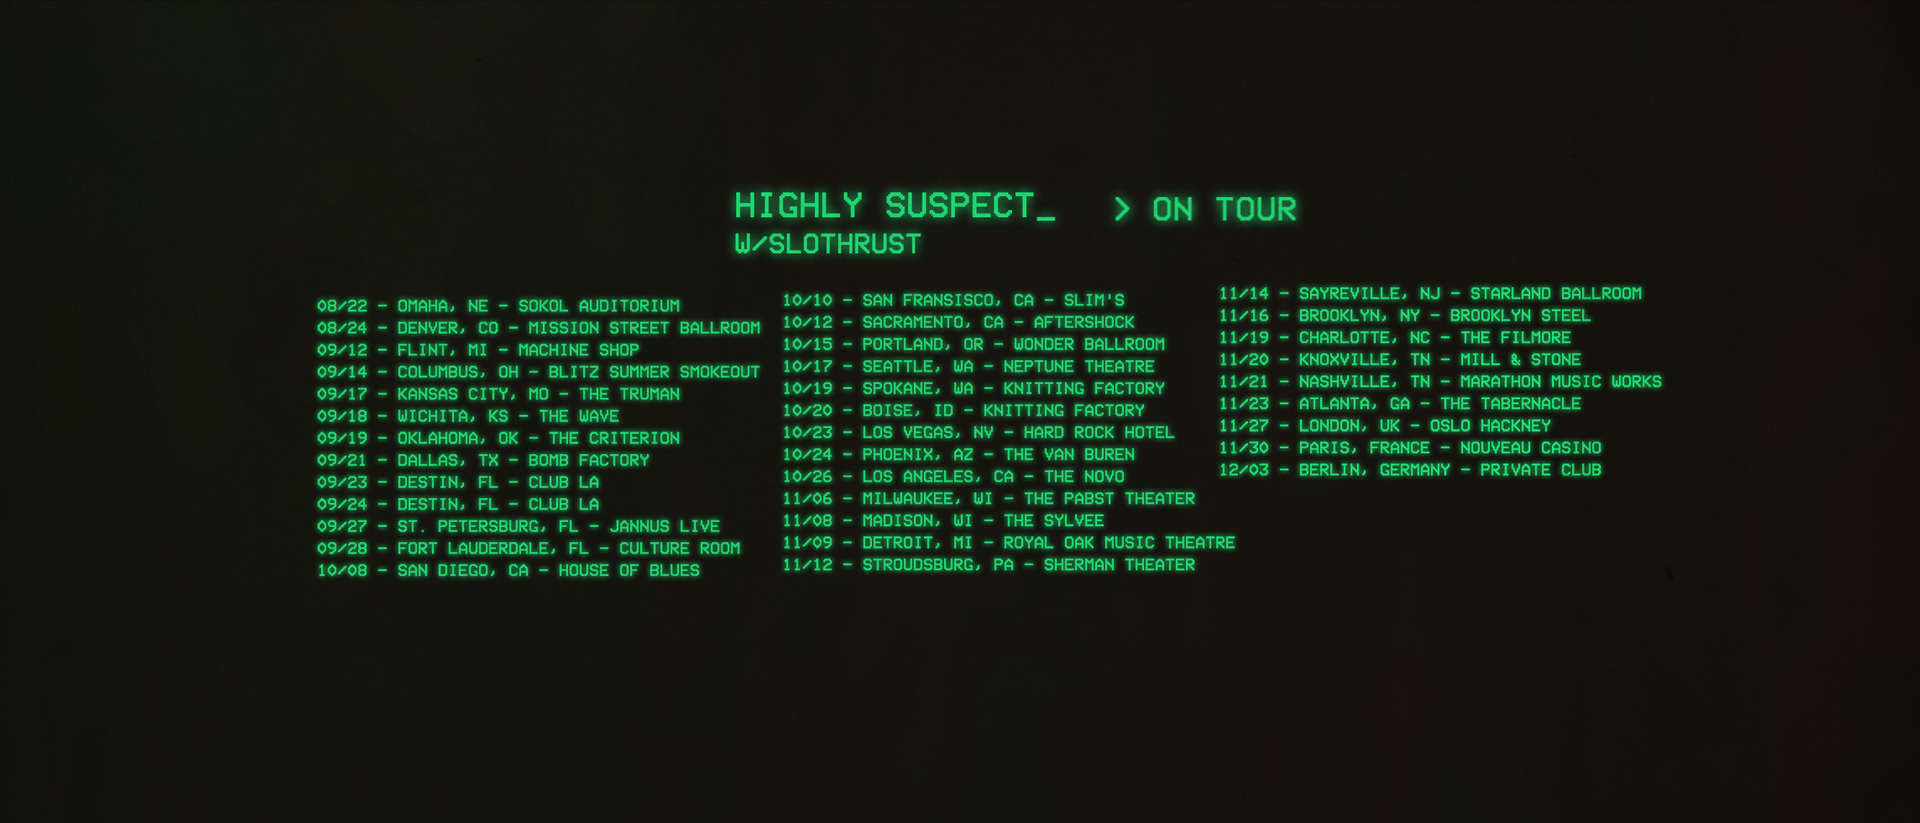 Young Thug featured on Highly Suspect song: genre bending track out today!